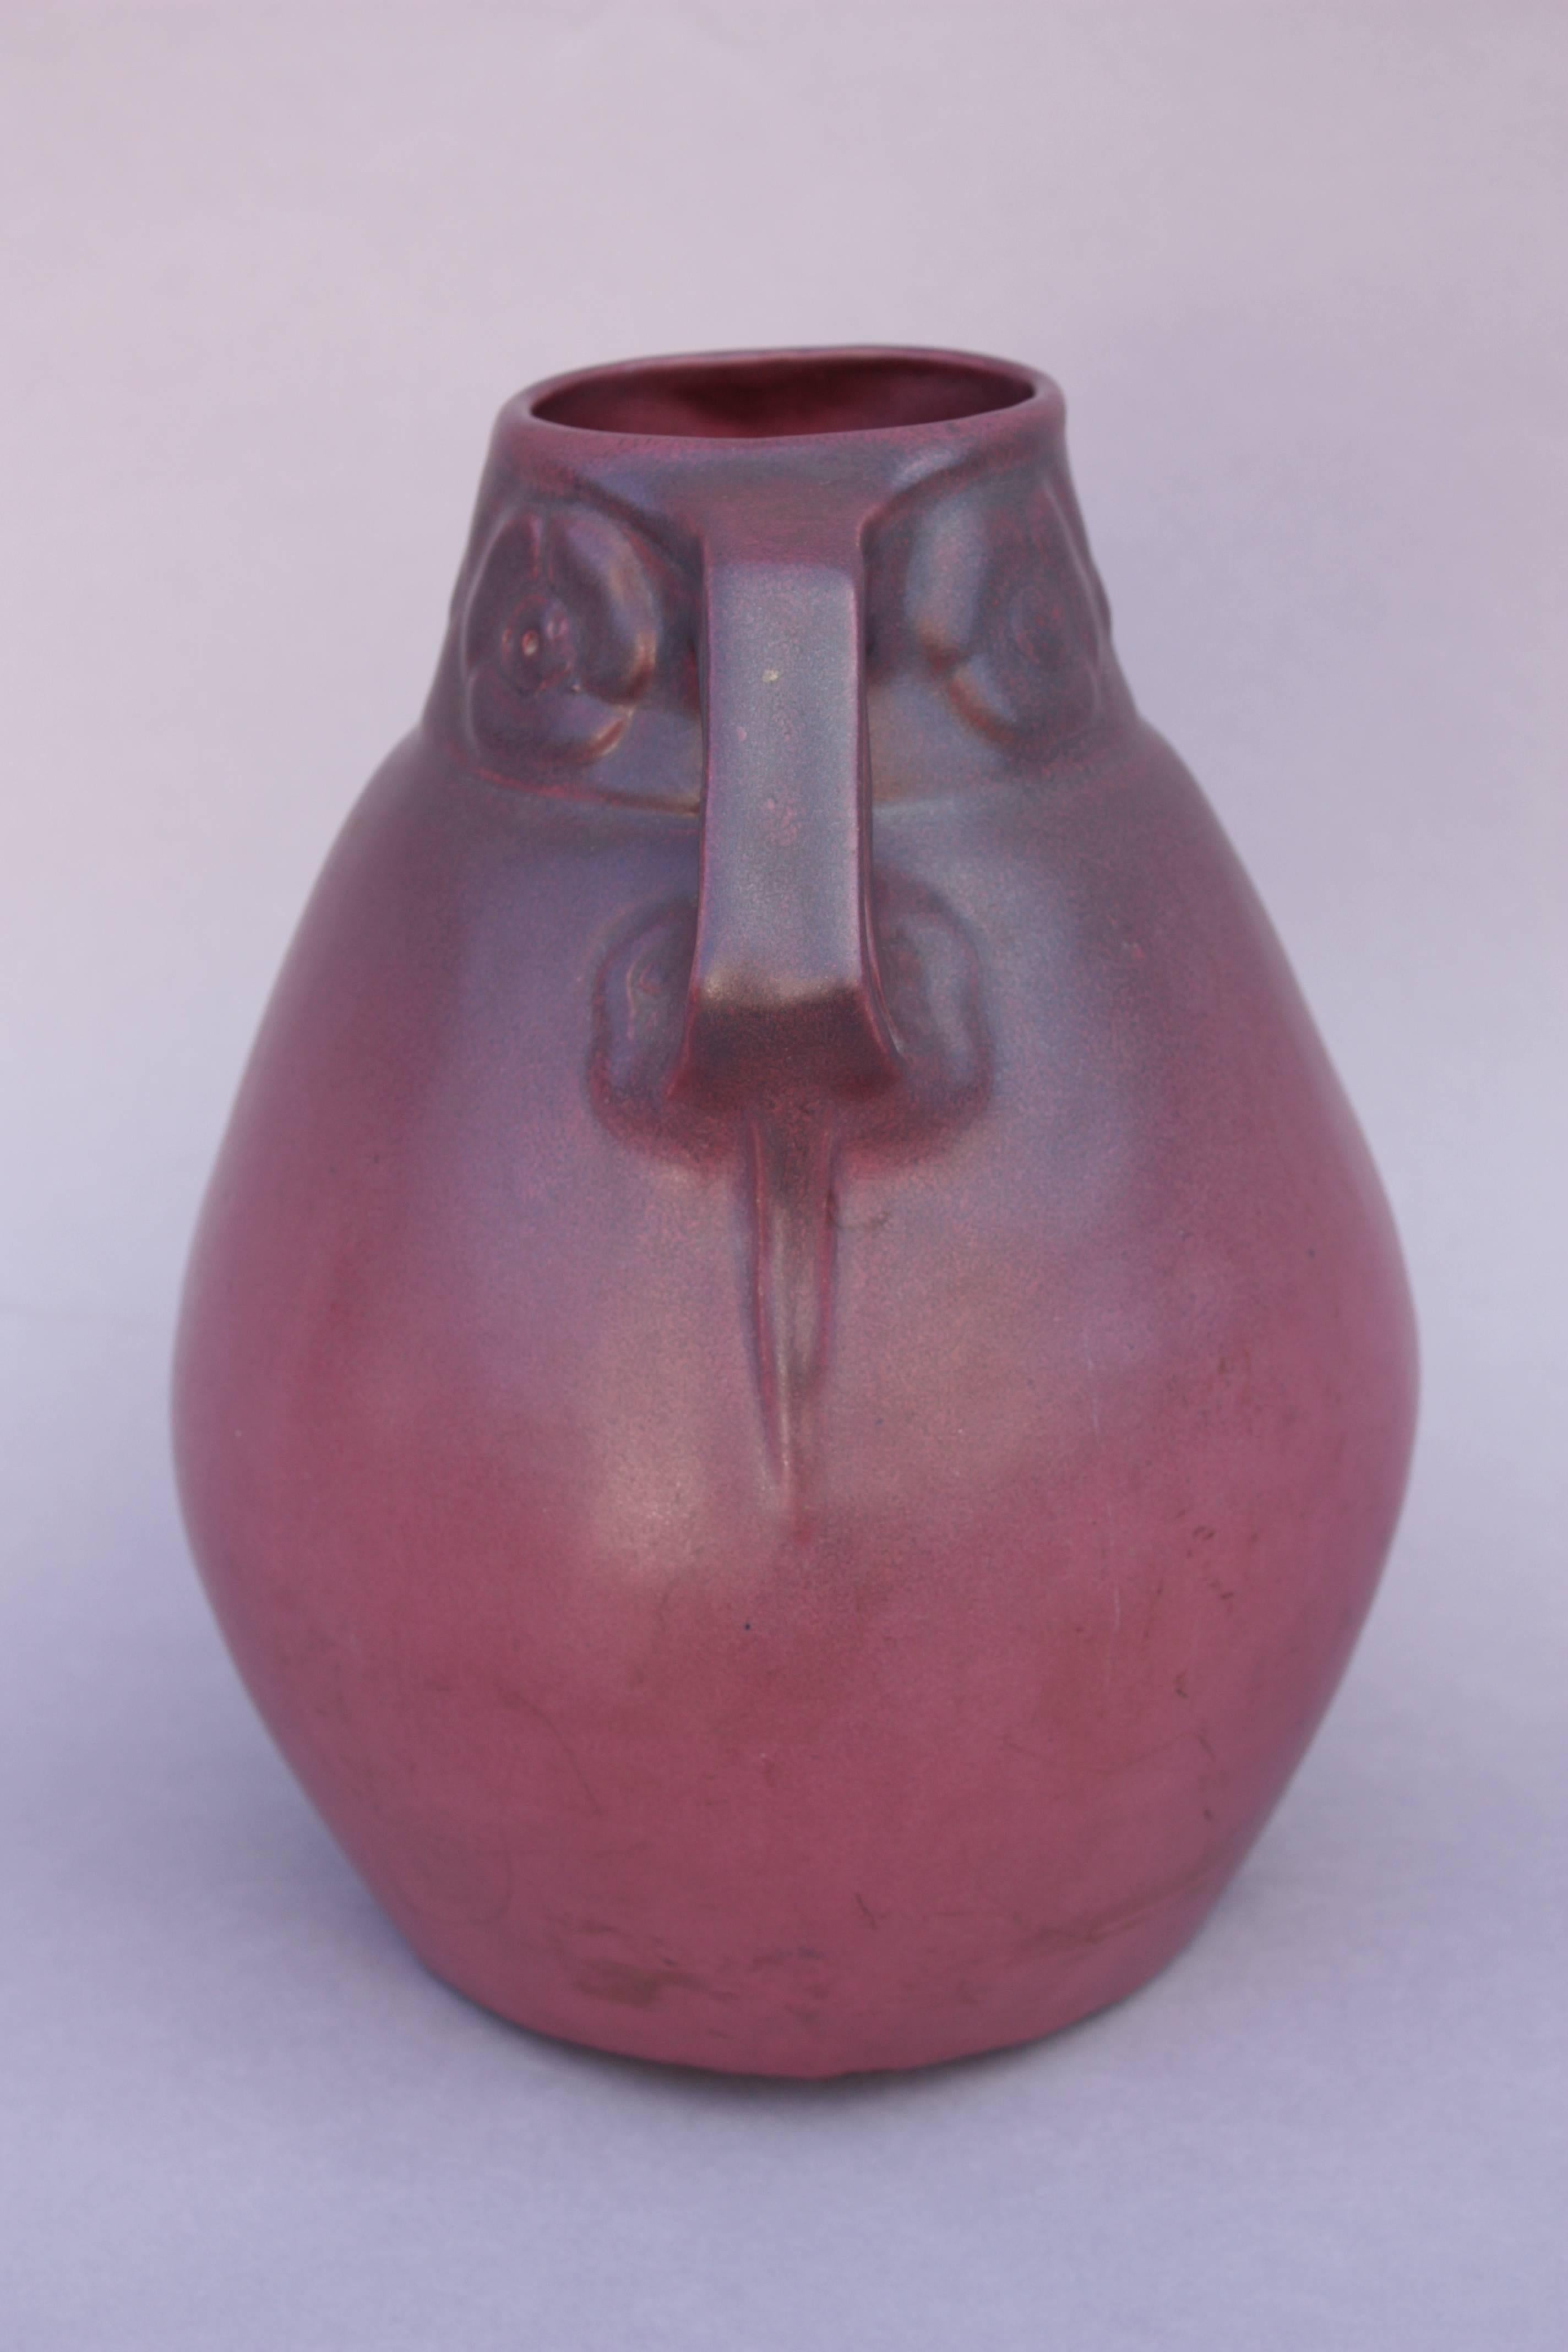 Early Van Briggle amphora shaped vase with floral band. Incised 1919. Beautiful glaze.